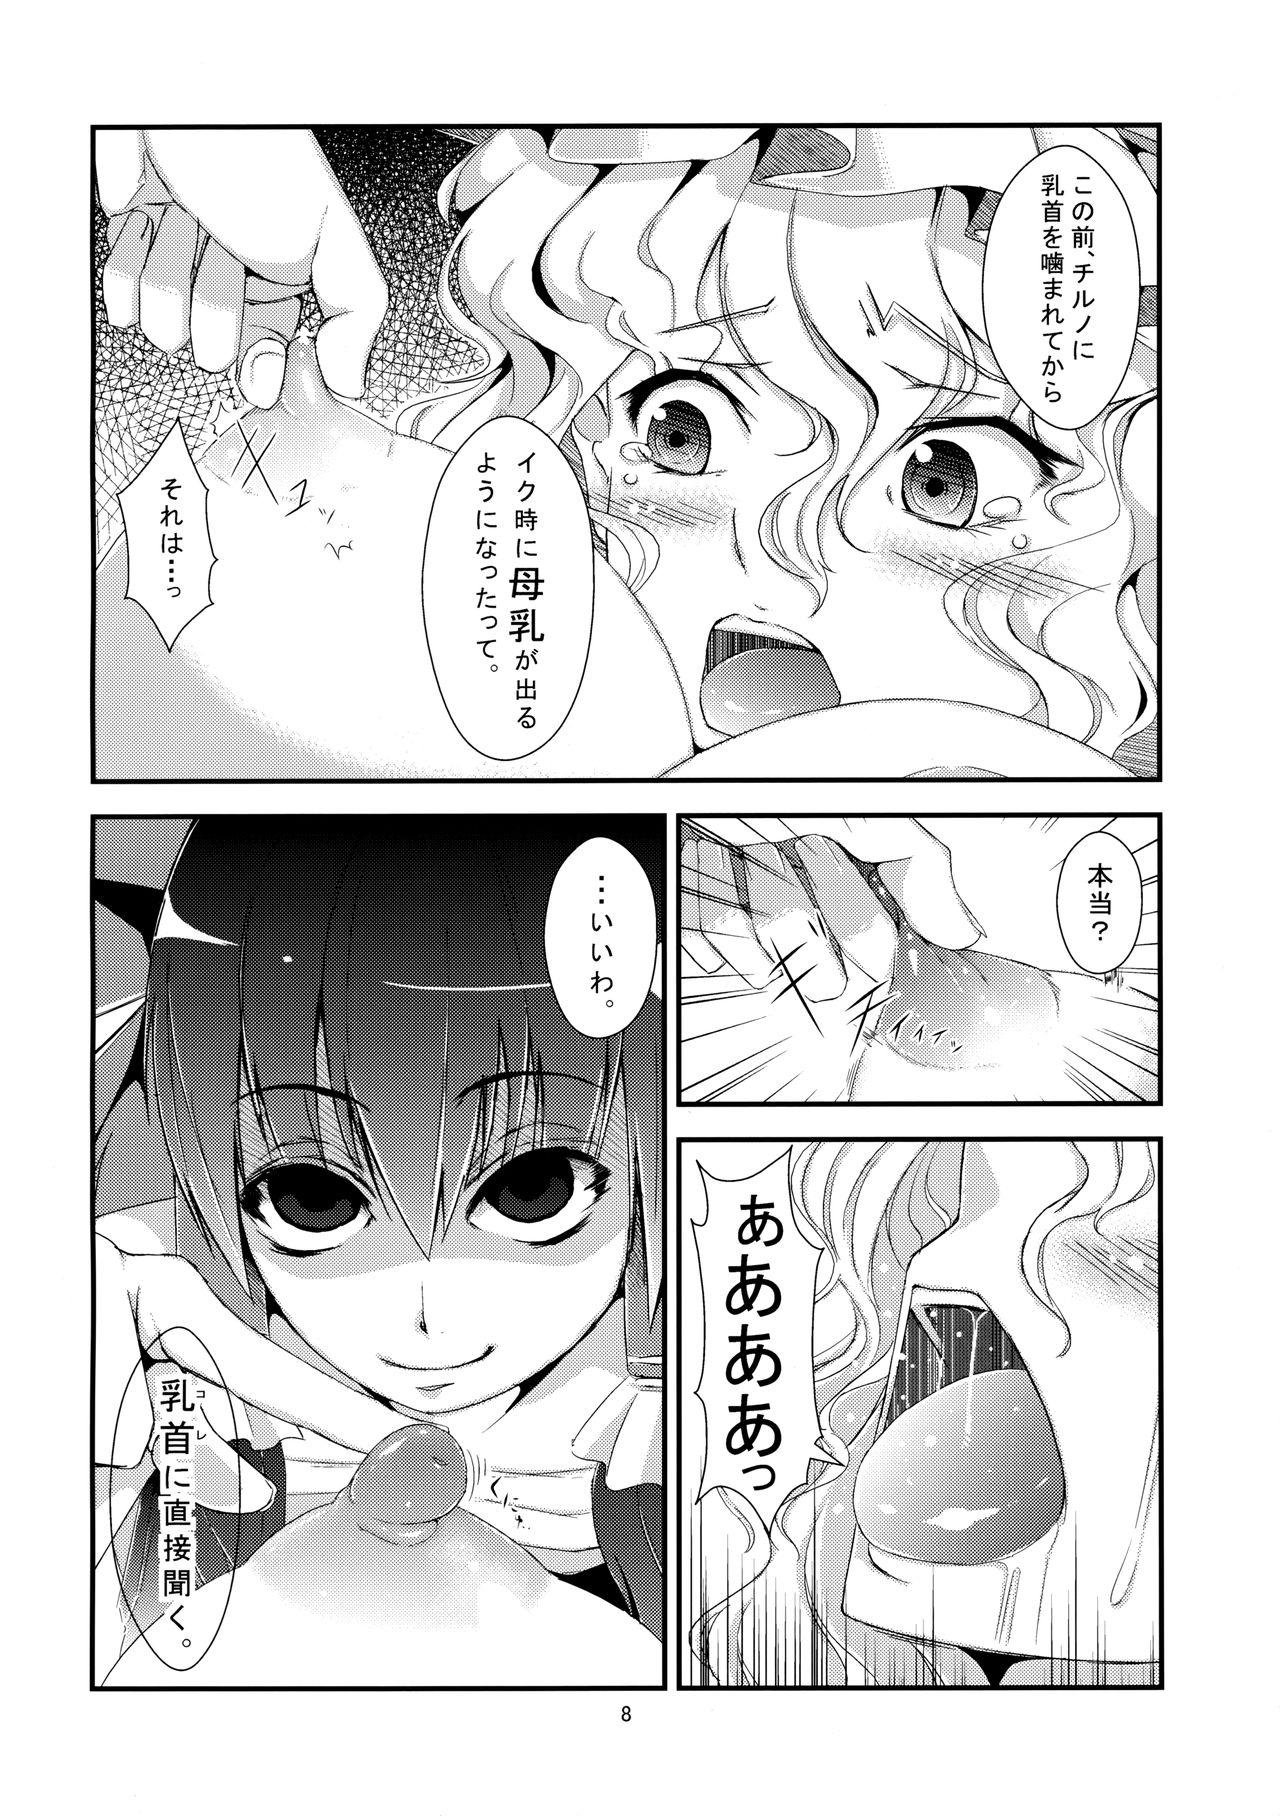 Russia AdultsOnly - Touhou project Lick - Page 7